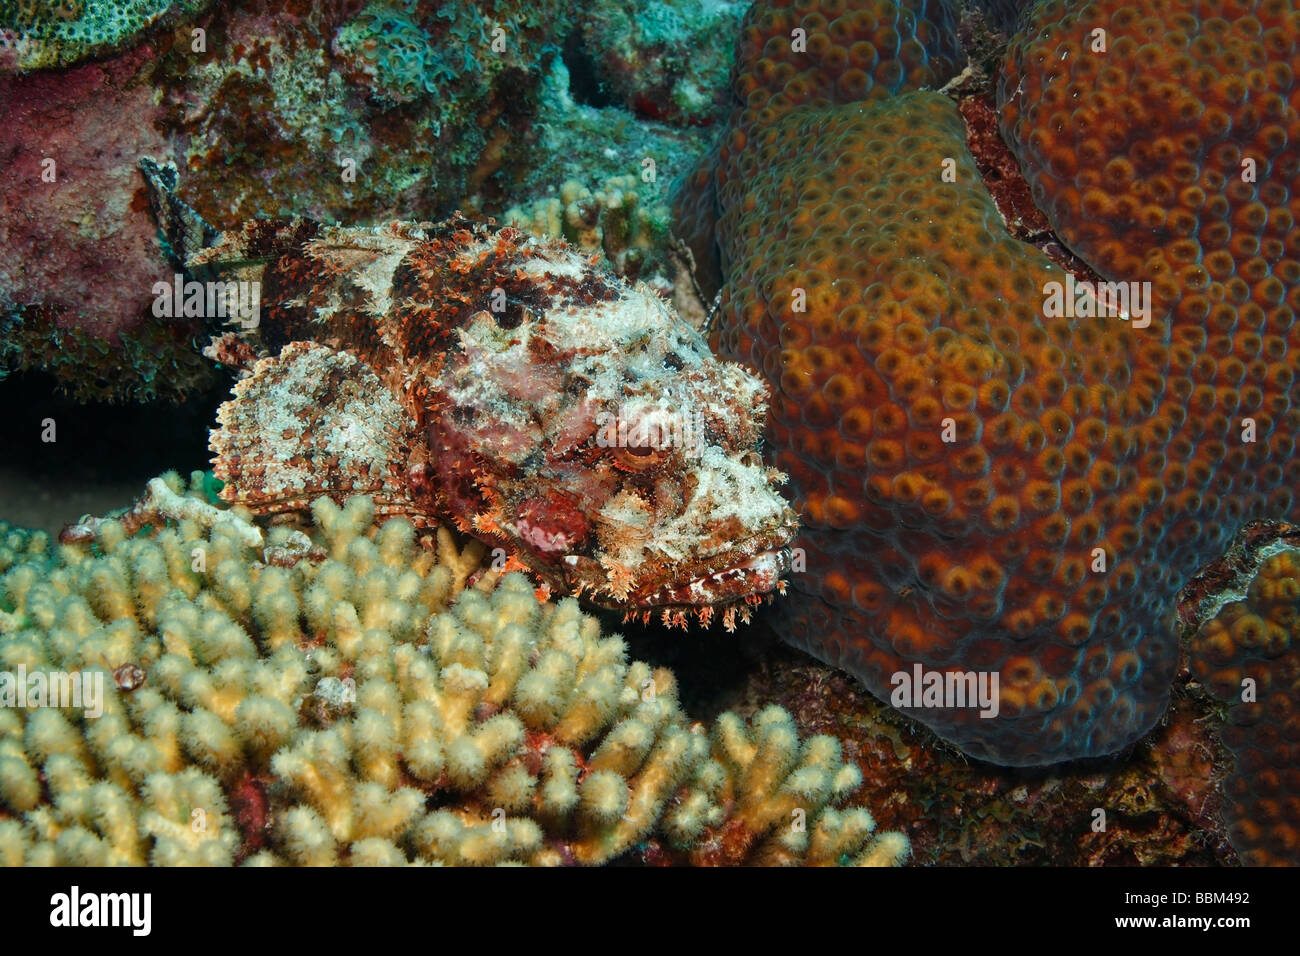 Spotted Scorpionfish Scorpaena plumieri resting on a coral reef Stock Photo